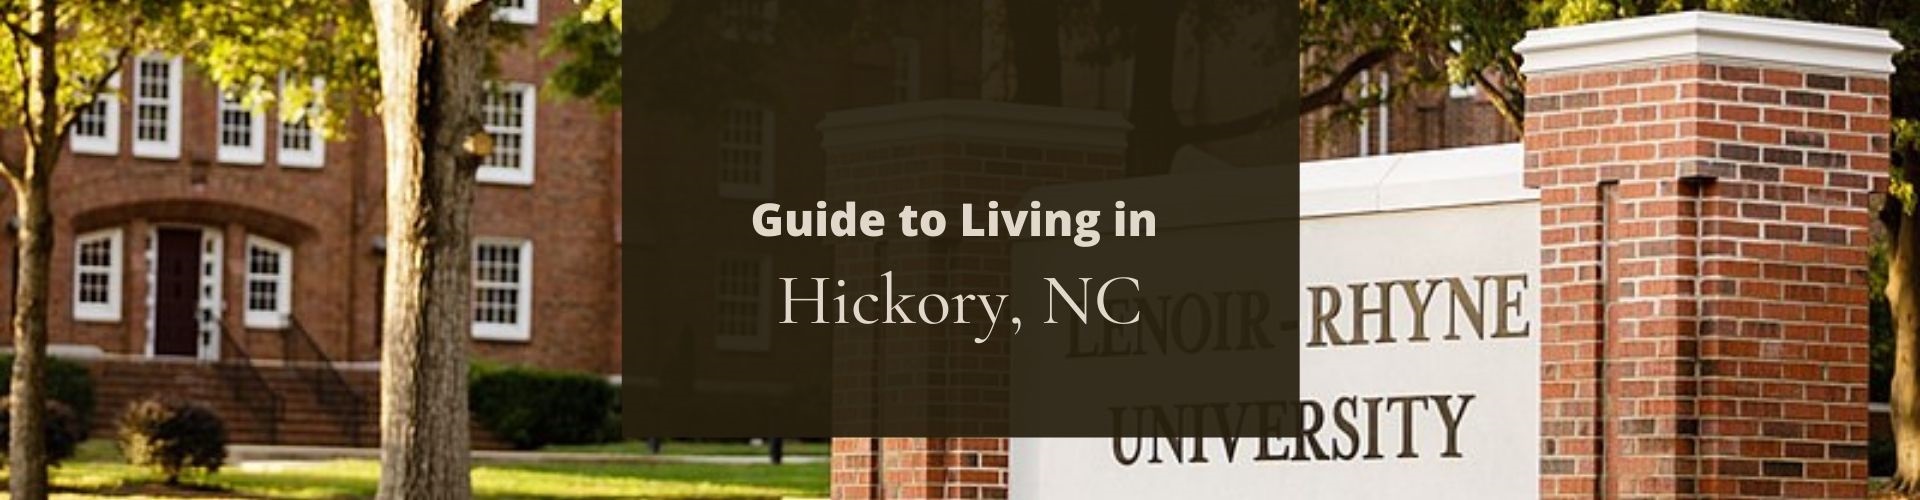 guide to Hickory NC